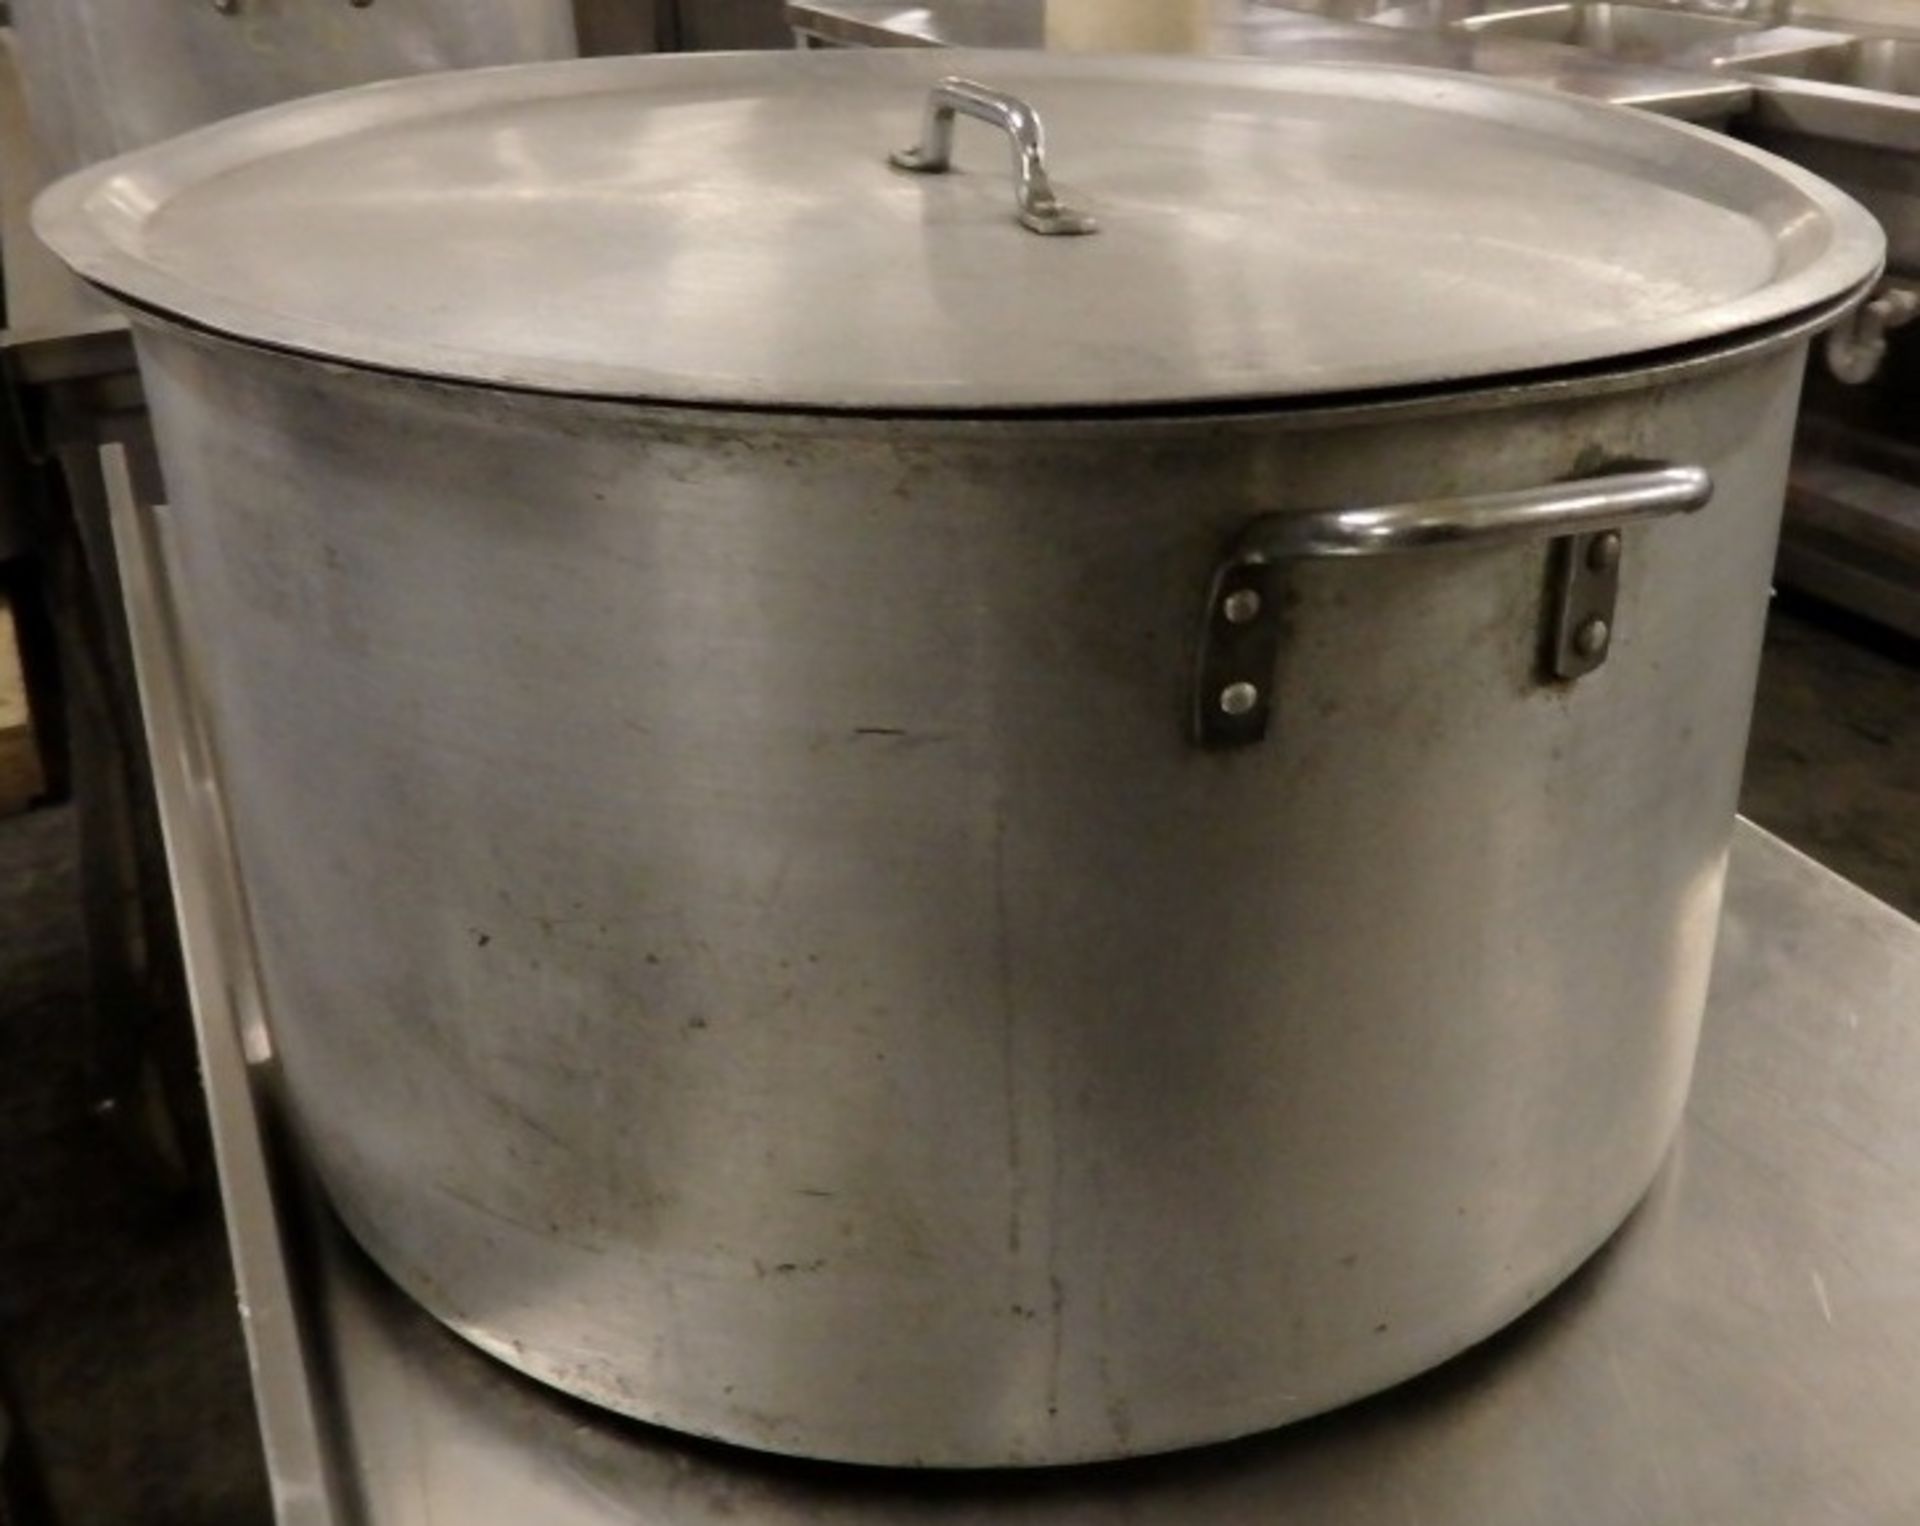 1 x Large Stainless Steel Cooking Pot With Lid - Dimensions: H34 x Diameter 57cm - Ref: BCE028 - - Image 3 of 5